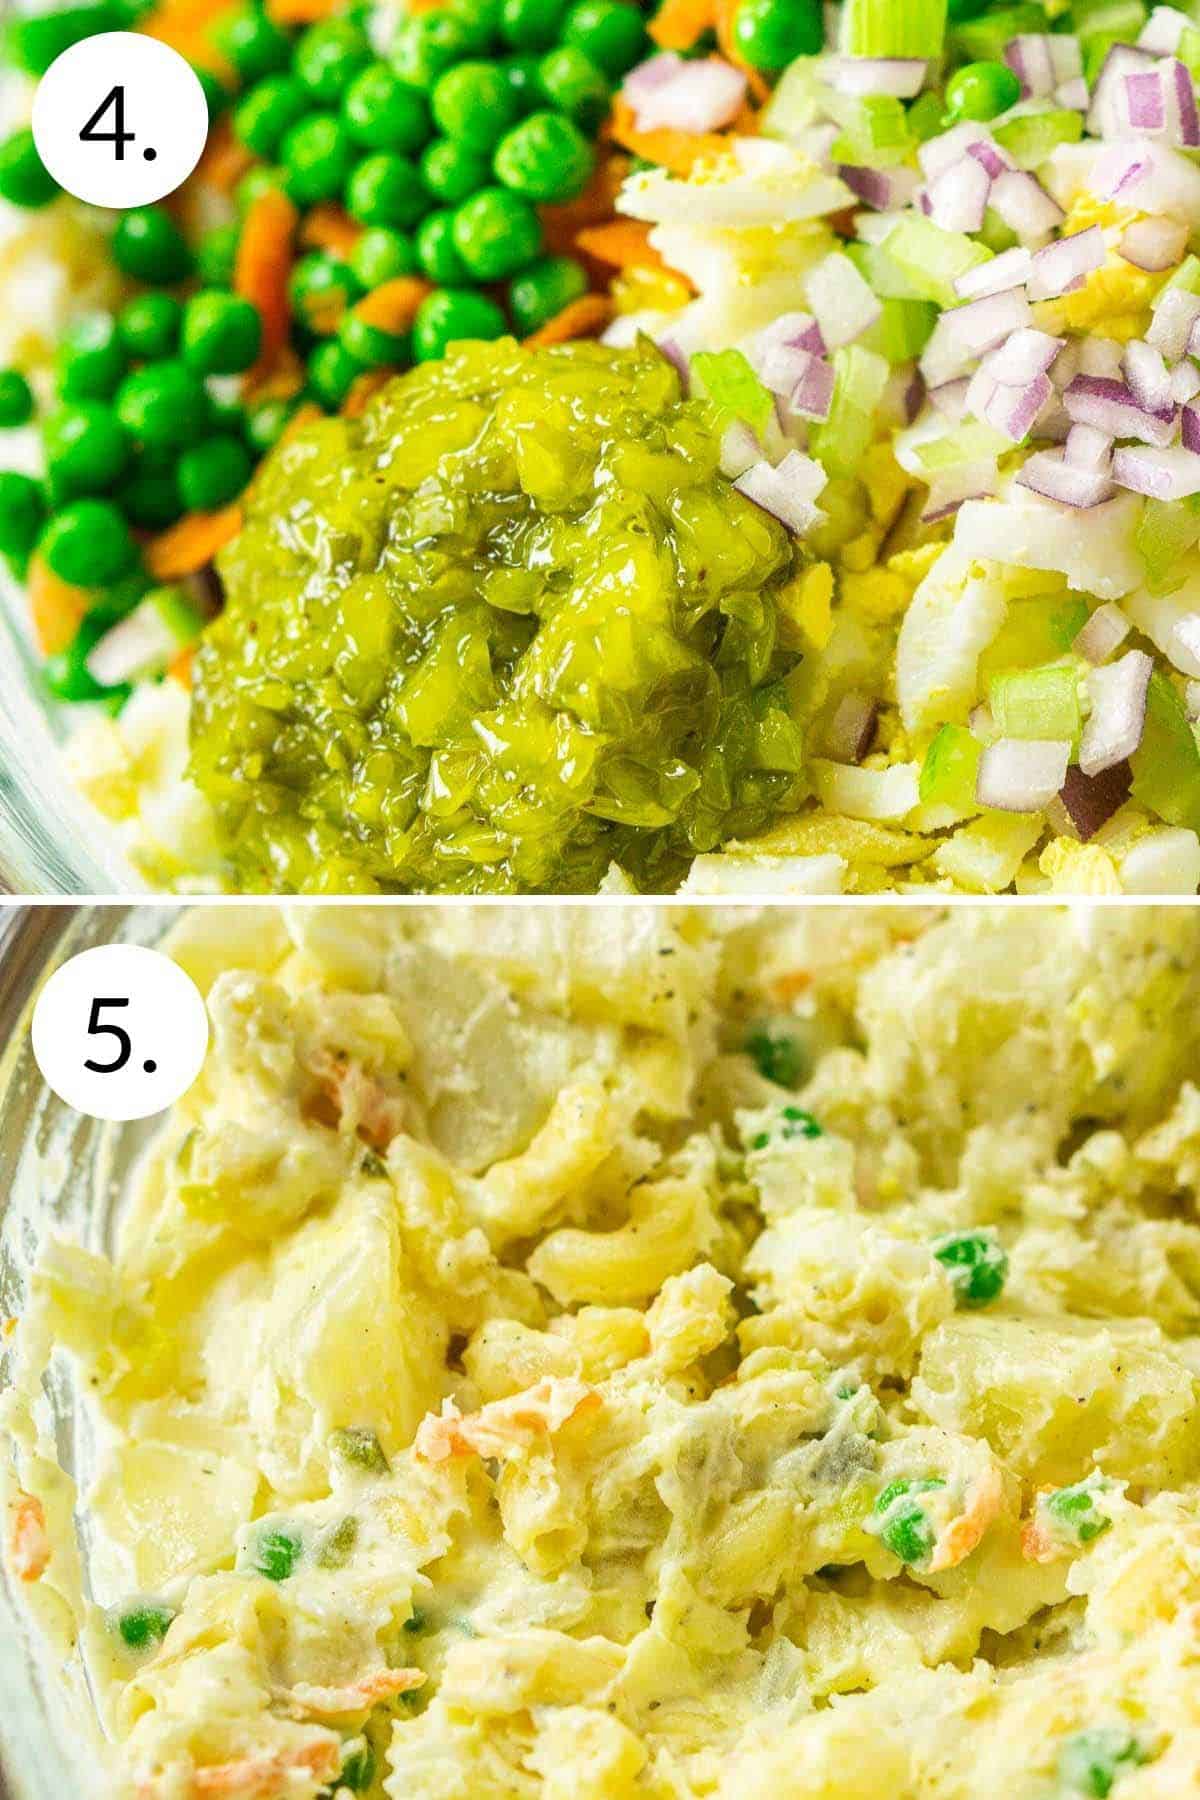 A collage showing the process of combining the mix-ins into the potato salad.